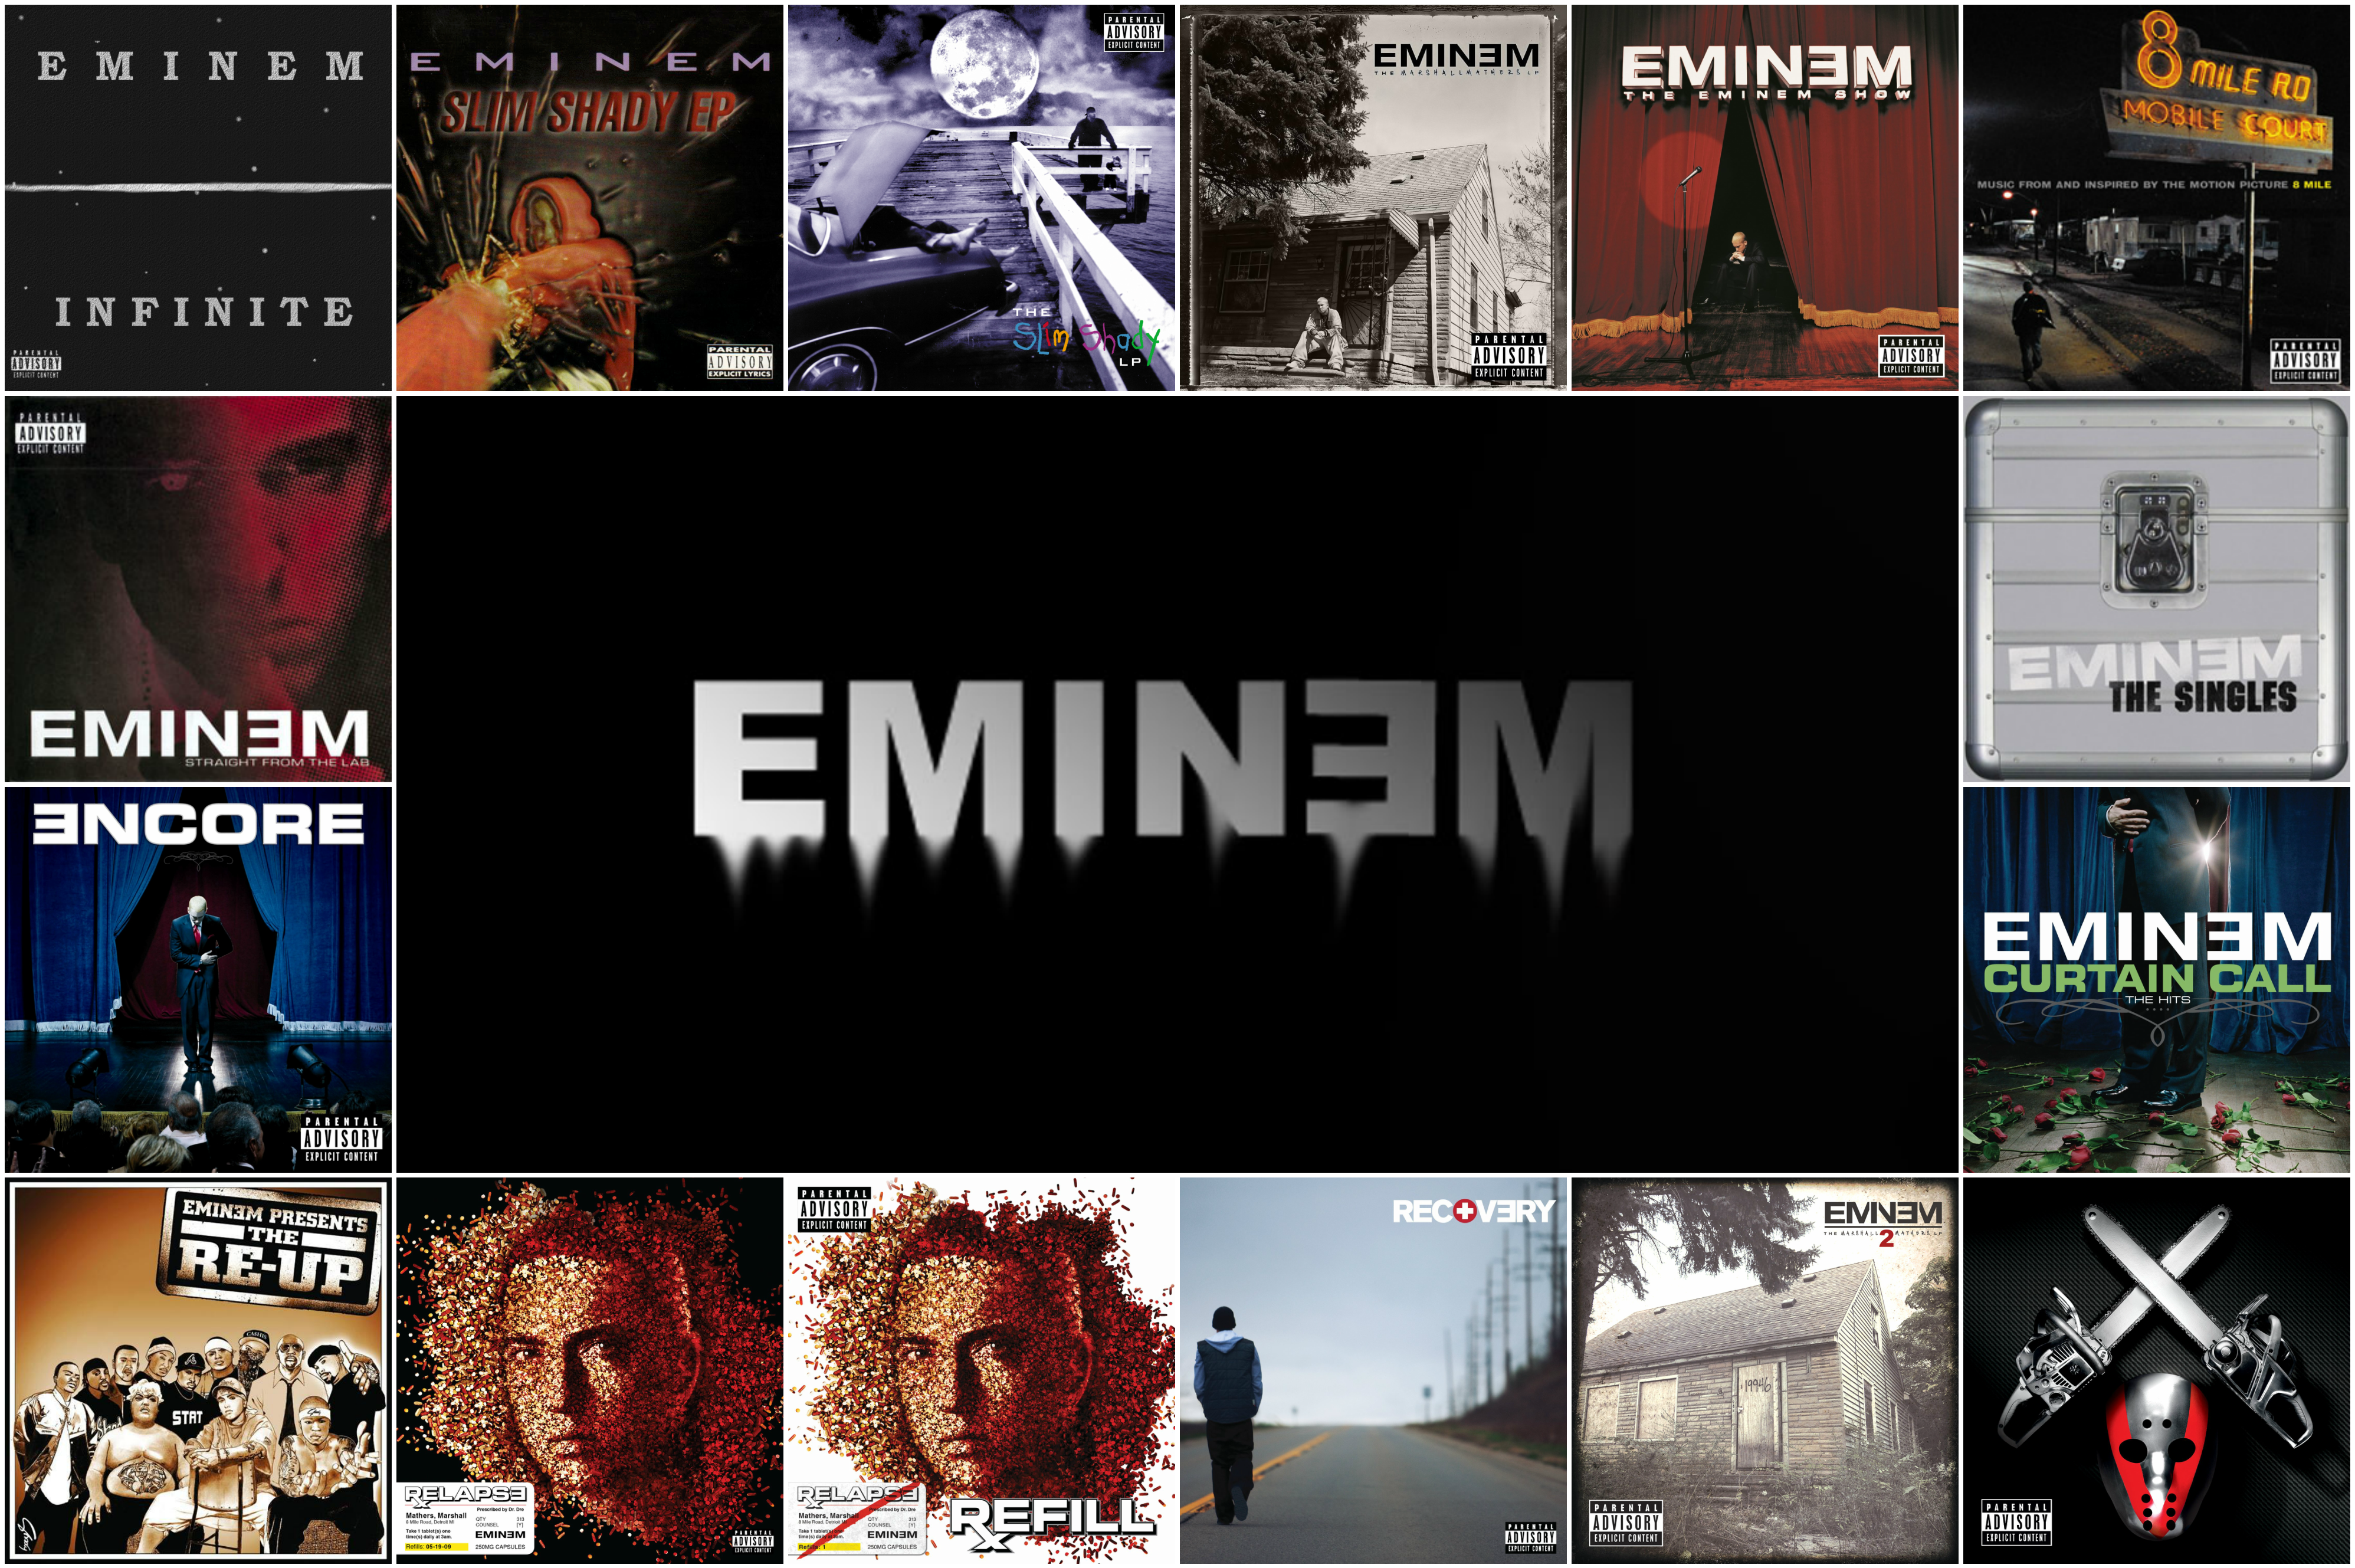 I Got Bored And Made An Eminem Wallpaper With Album Art